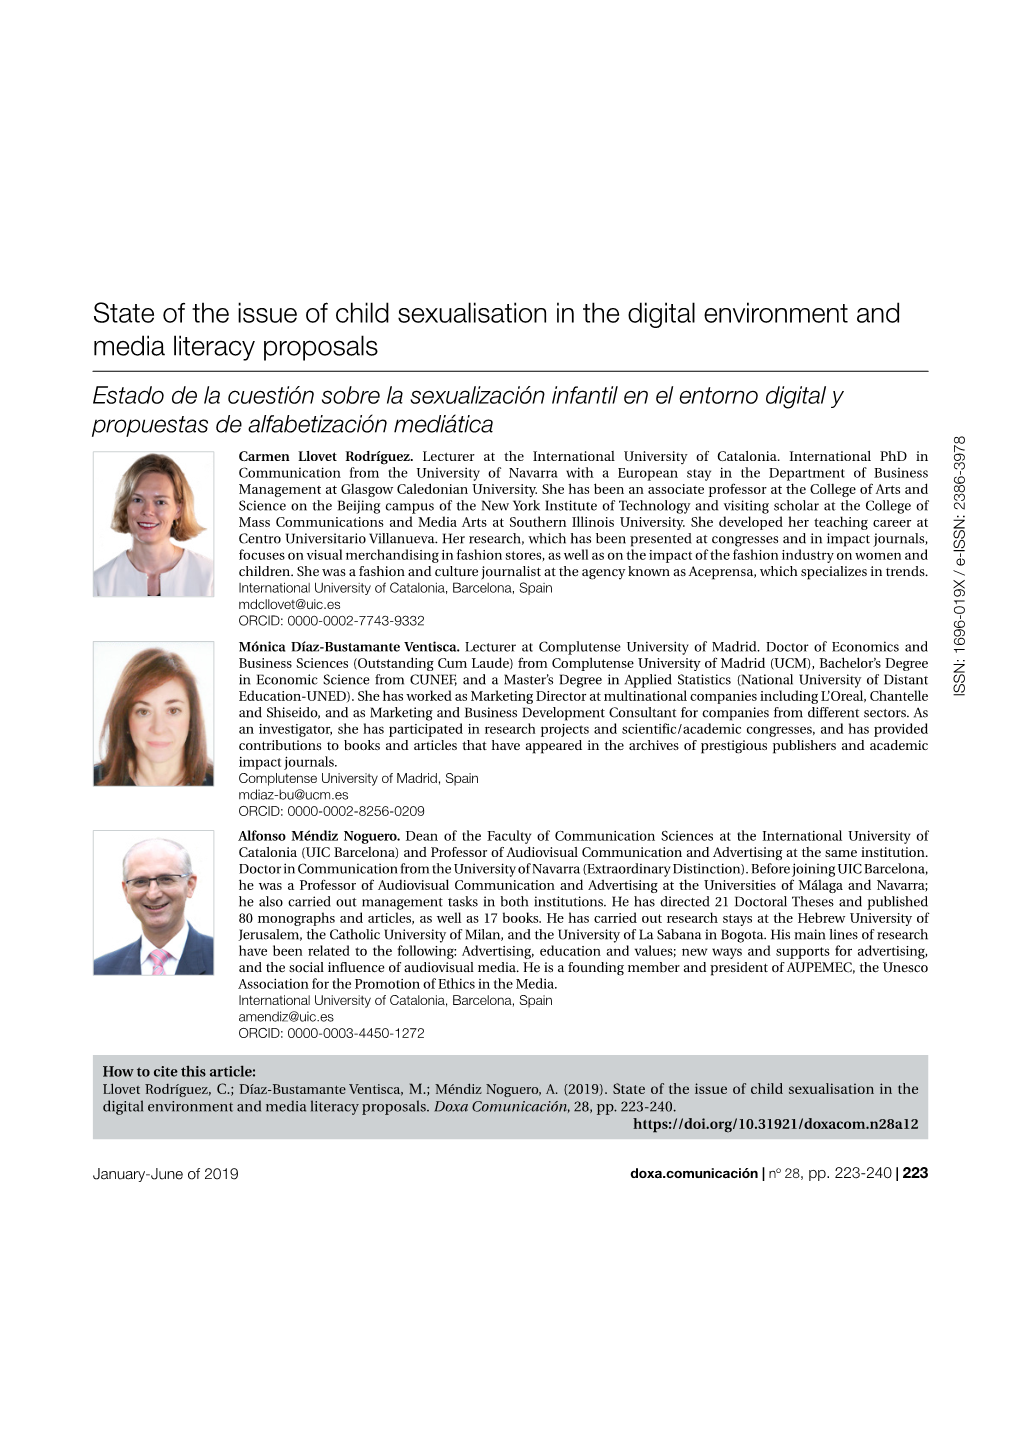 State of the Issue of Child Sexualisation in the Digital